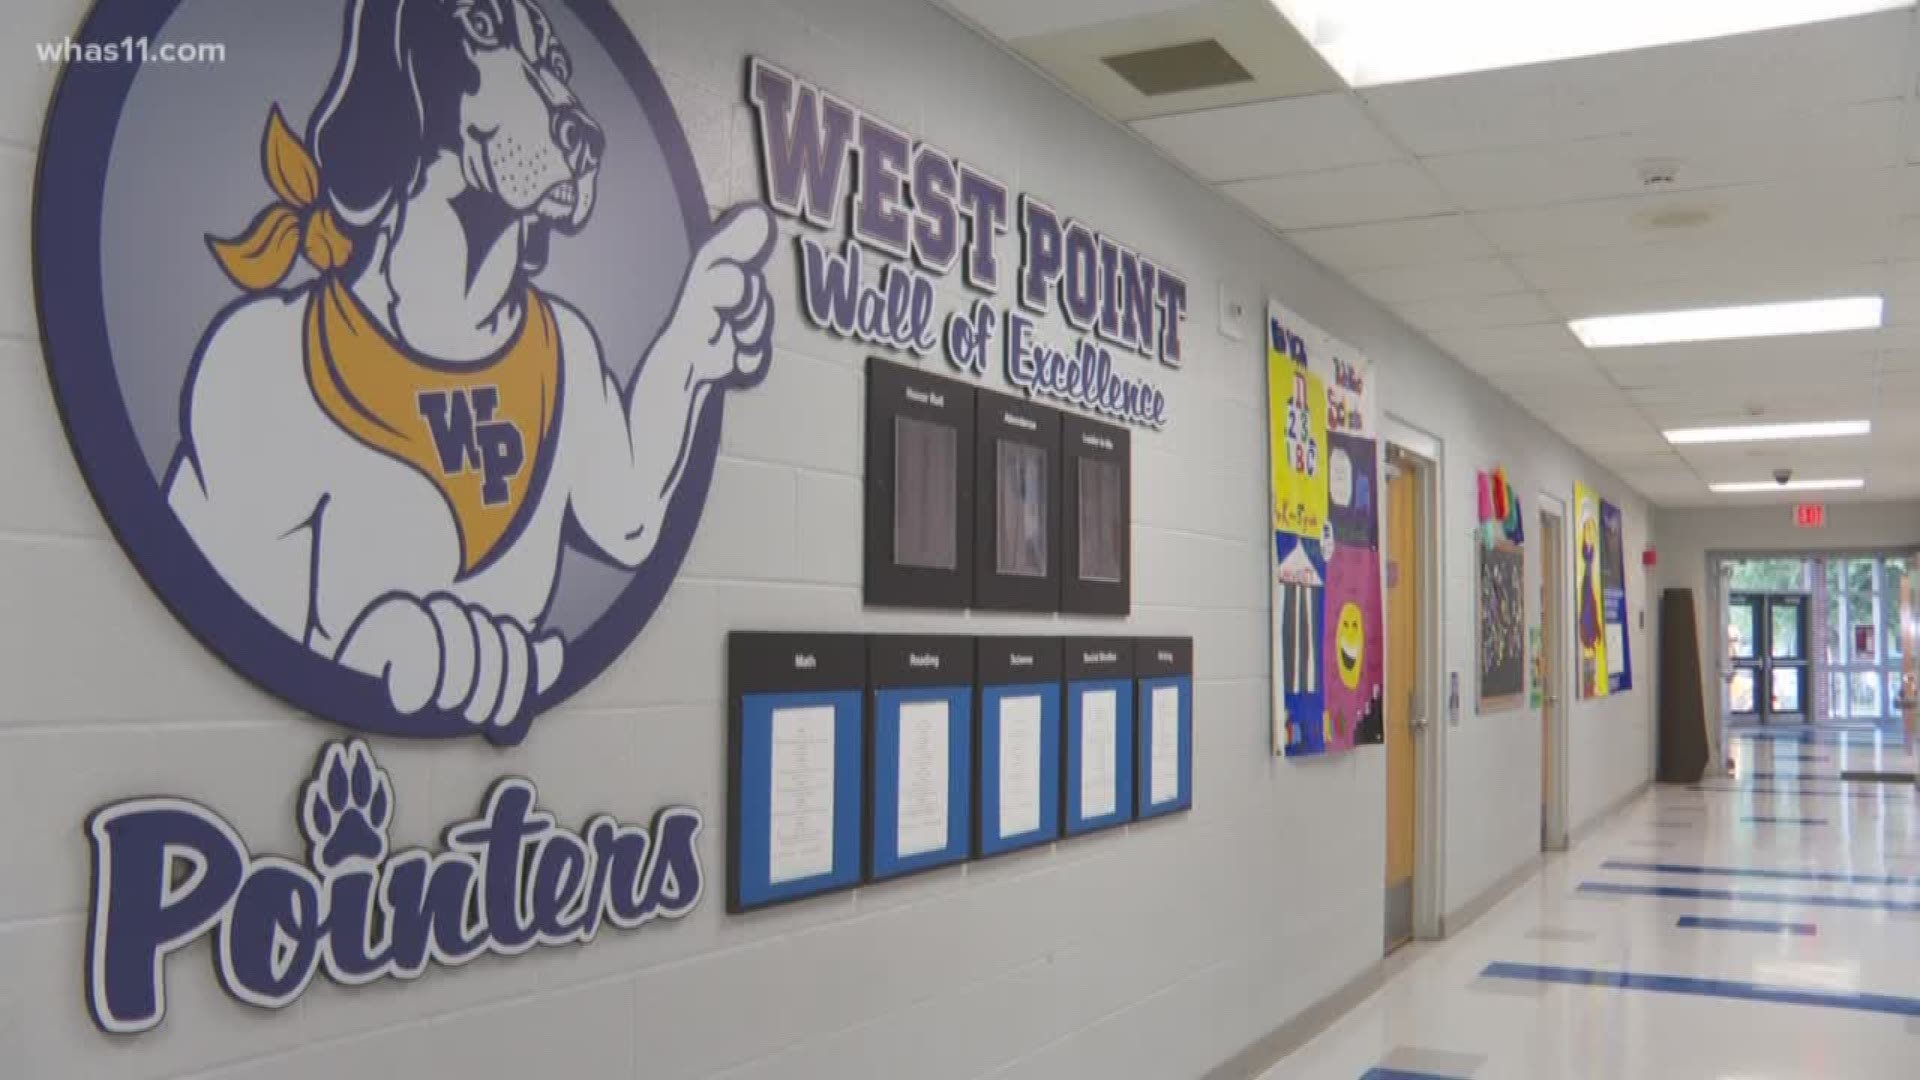 A small school district not far from Louisville is facing the possibility of a state takeover after an audit found several issues.